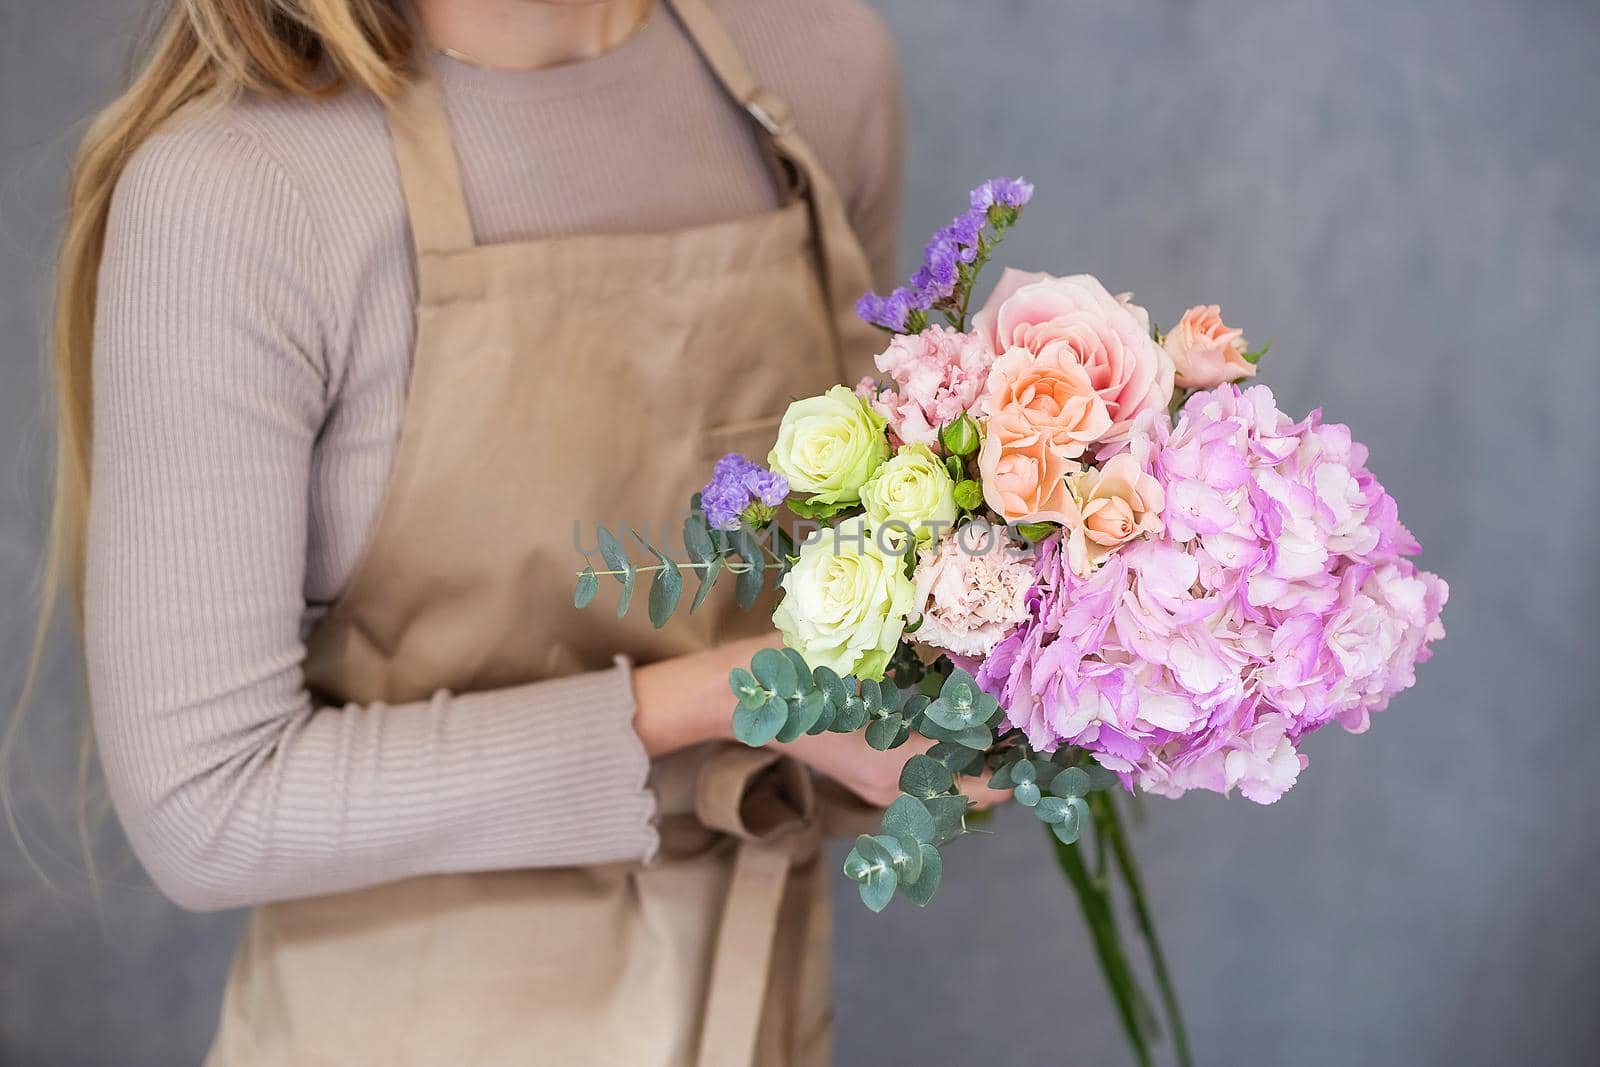 Florist at work. Female hands collect a romantic bouquet of roses. by galinasharapova